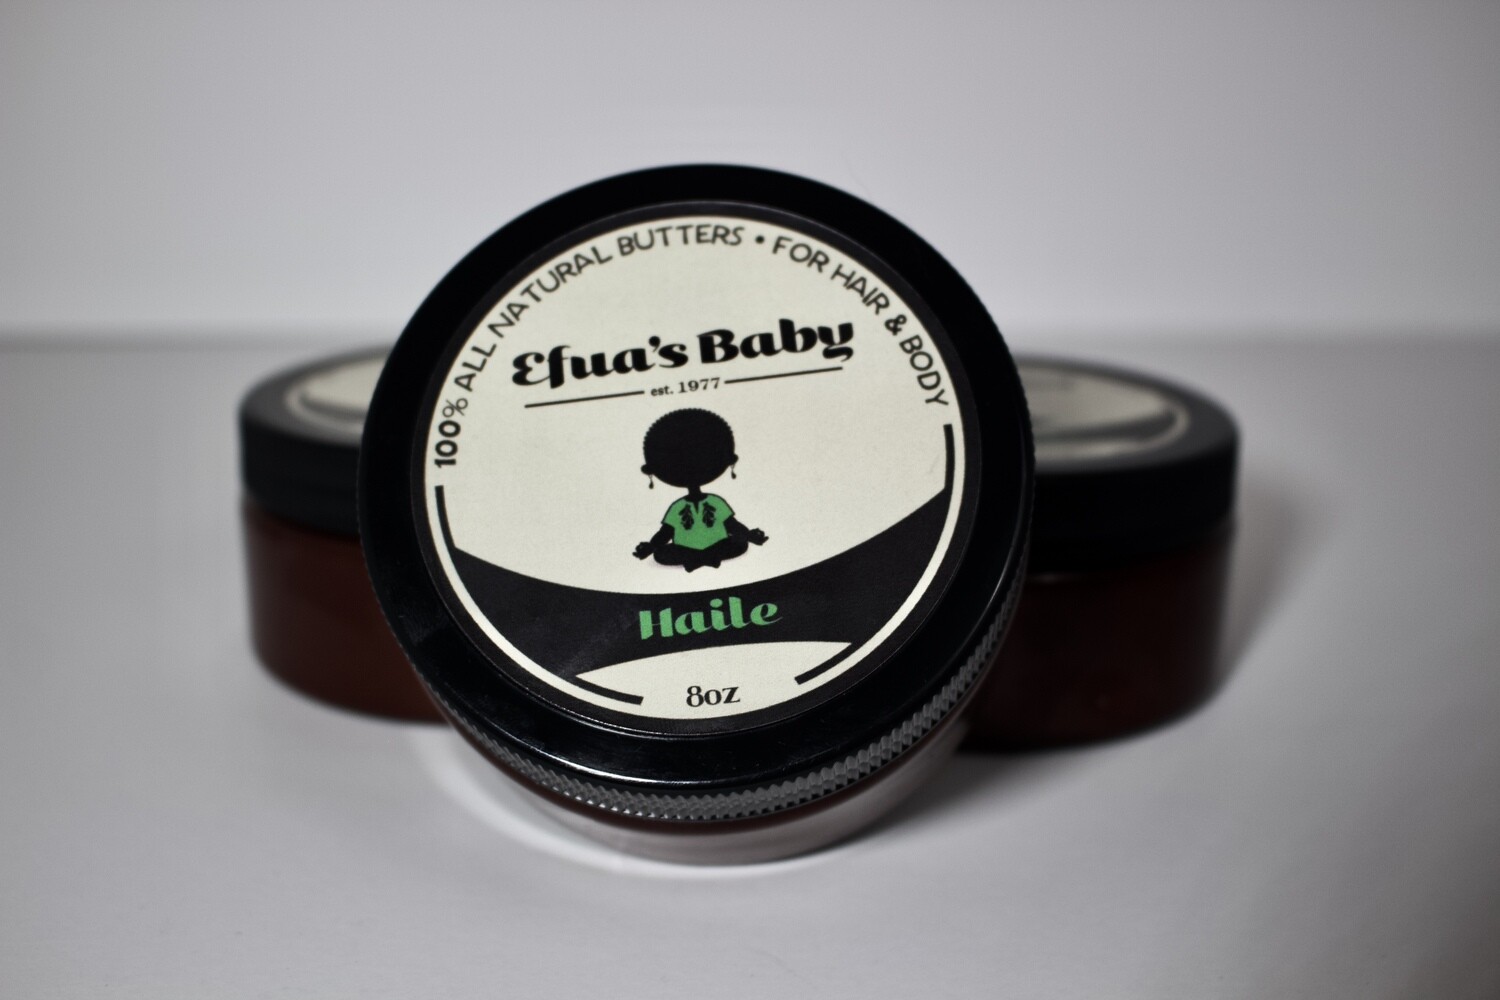 Haile 8oz KING Series Body Butters